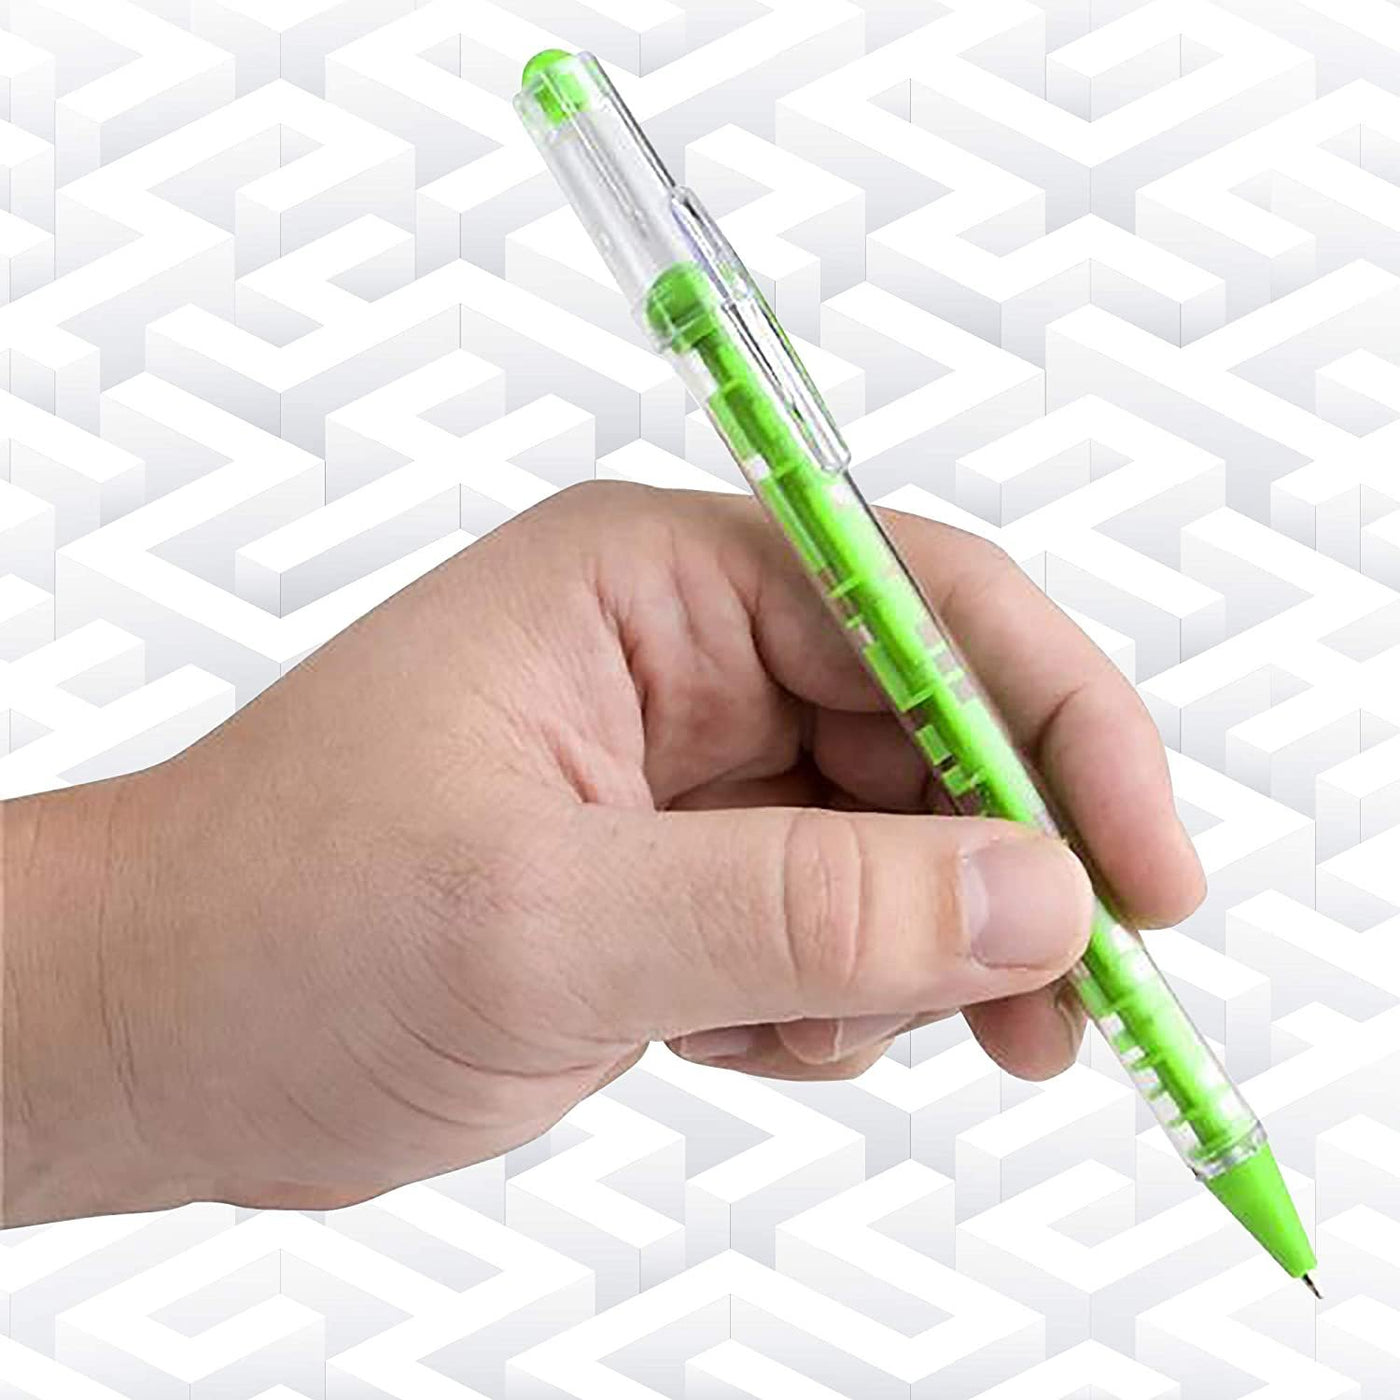 Gamie Maze Puzzle Novelty Pens for Kids and Adults - Pack of 12 - Pens with Built-in Ball Maze - Fidget Toy for Stress Relief - School and Office Stationery Supplies, Birthday Party Favors